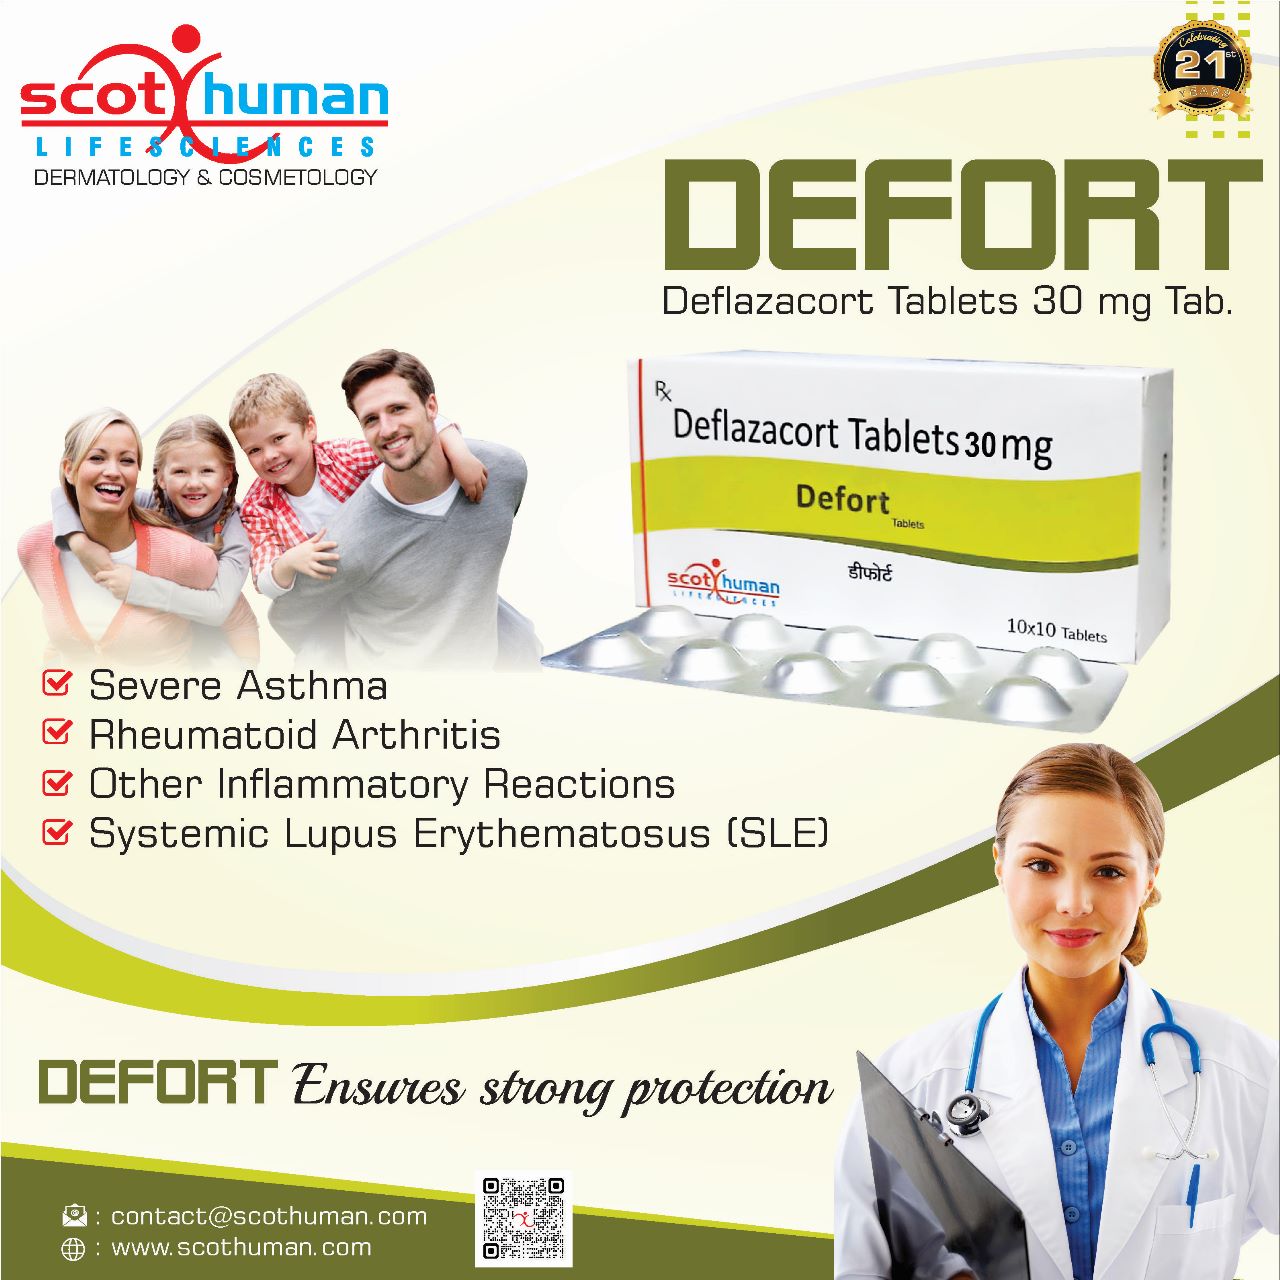 Product Name: Defart, Compositions of Defart are Daflazacort Tablets 30 mg - Pharma Drugs and Chemicals